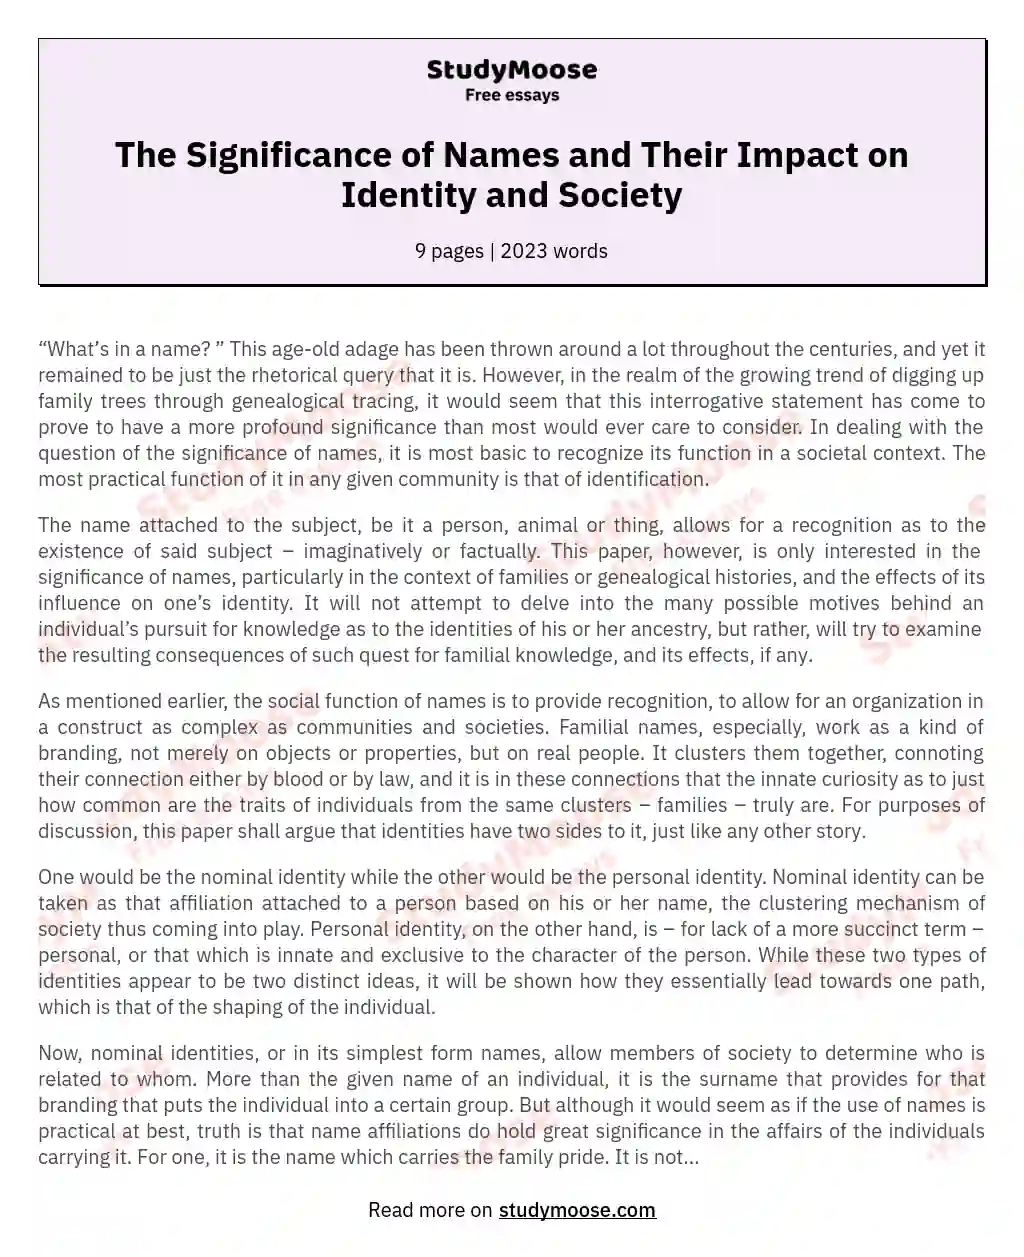 The Significance of Names and Their Impact on Identity and Society essay